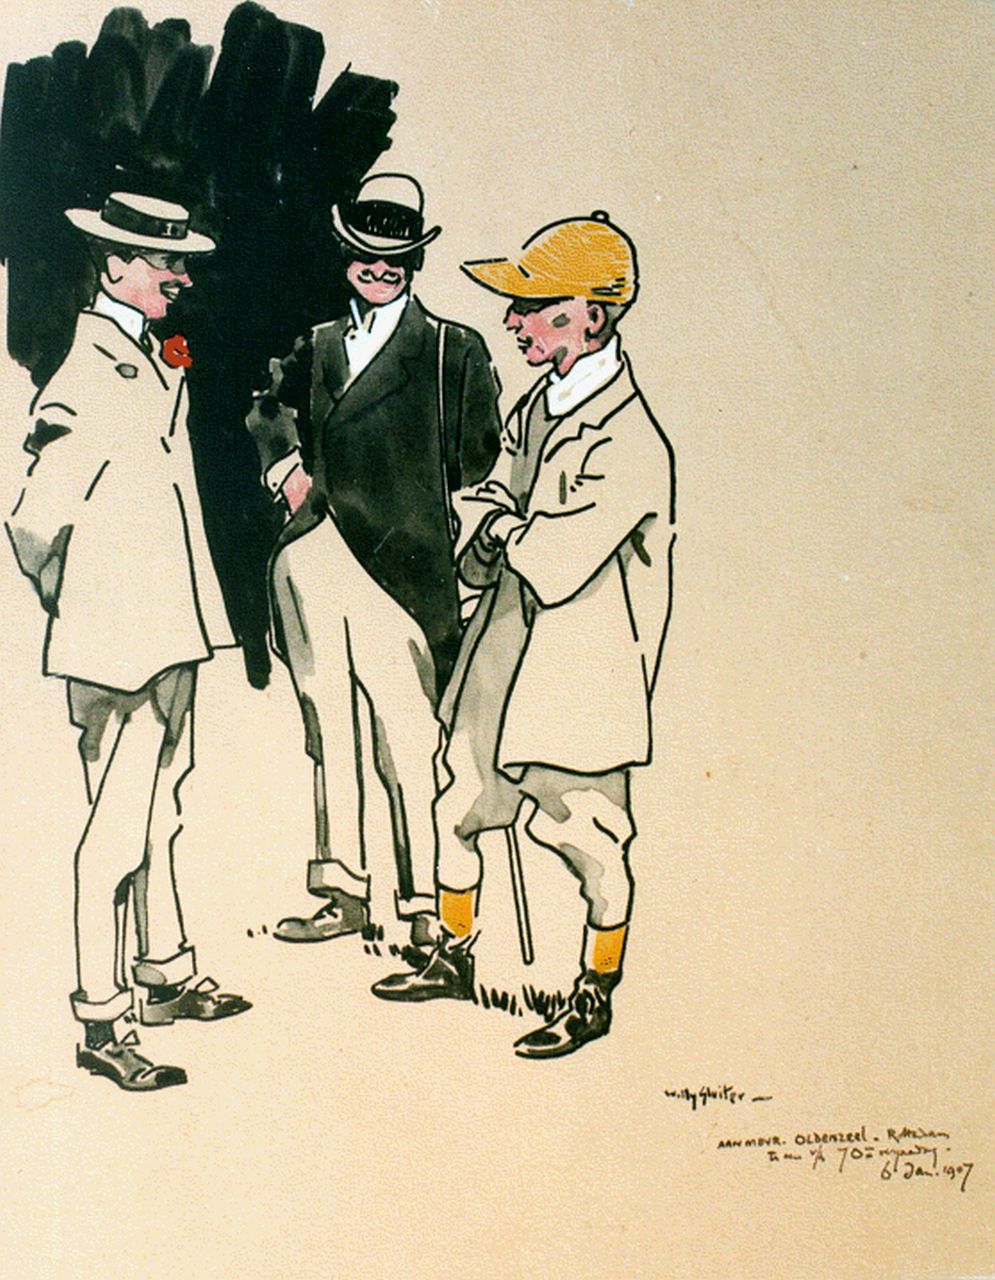 Sluiter J.W.  | Jan Willem 'Willy' Sluiter, Talking with the jockey, Indian ink on paper 26.5 x 20.8 cm, signed l.r. and executed on Jan. 6th 1907